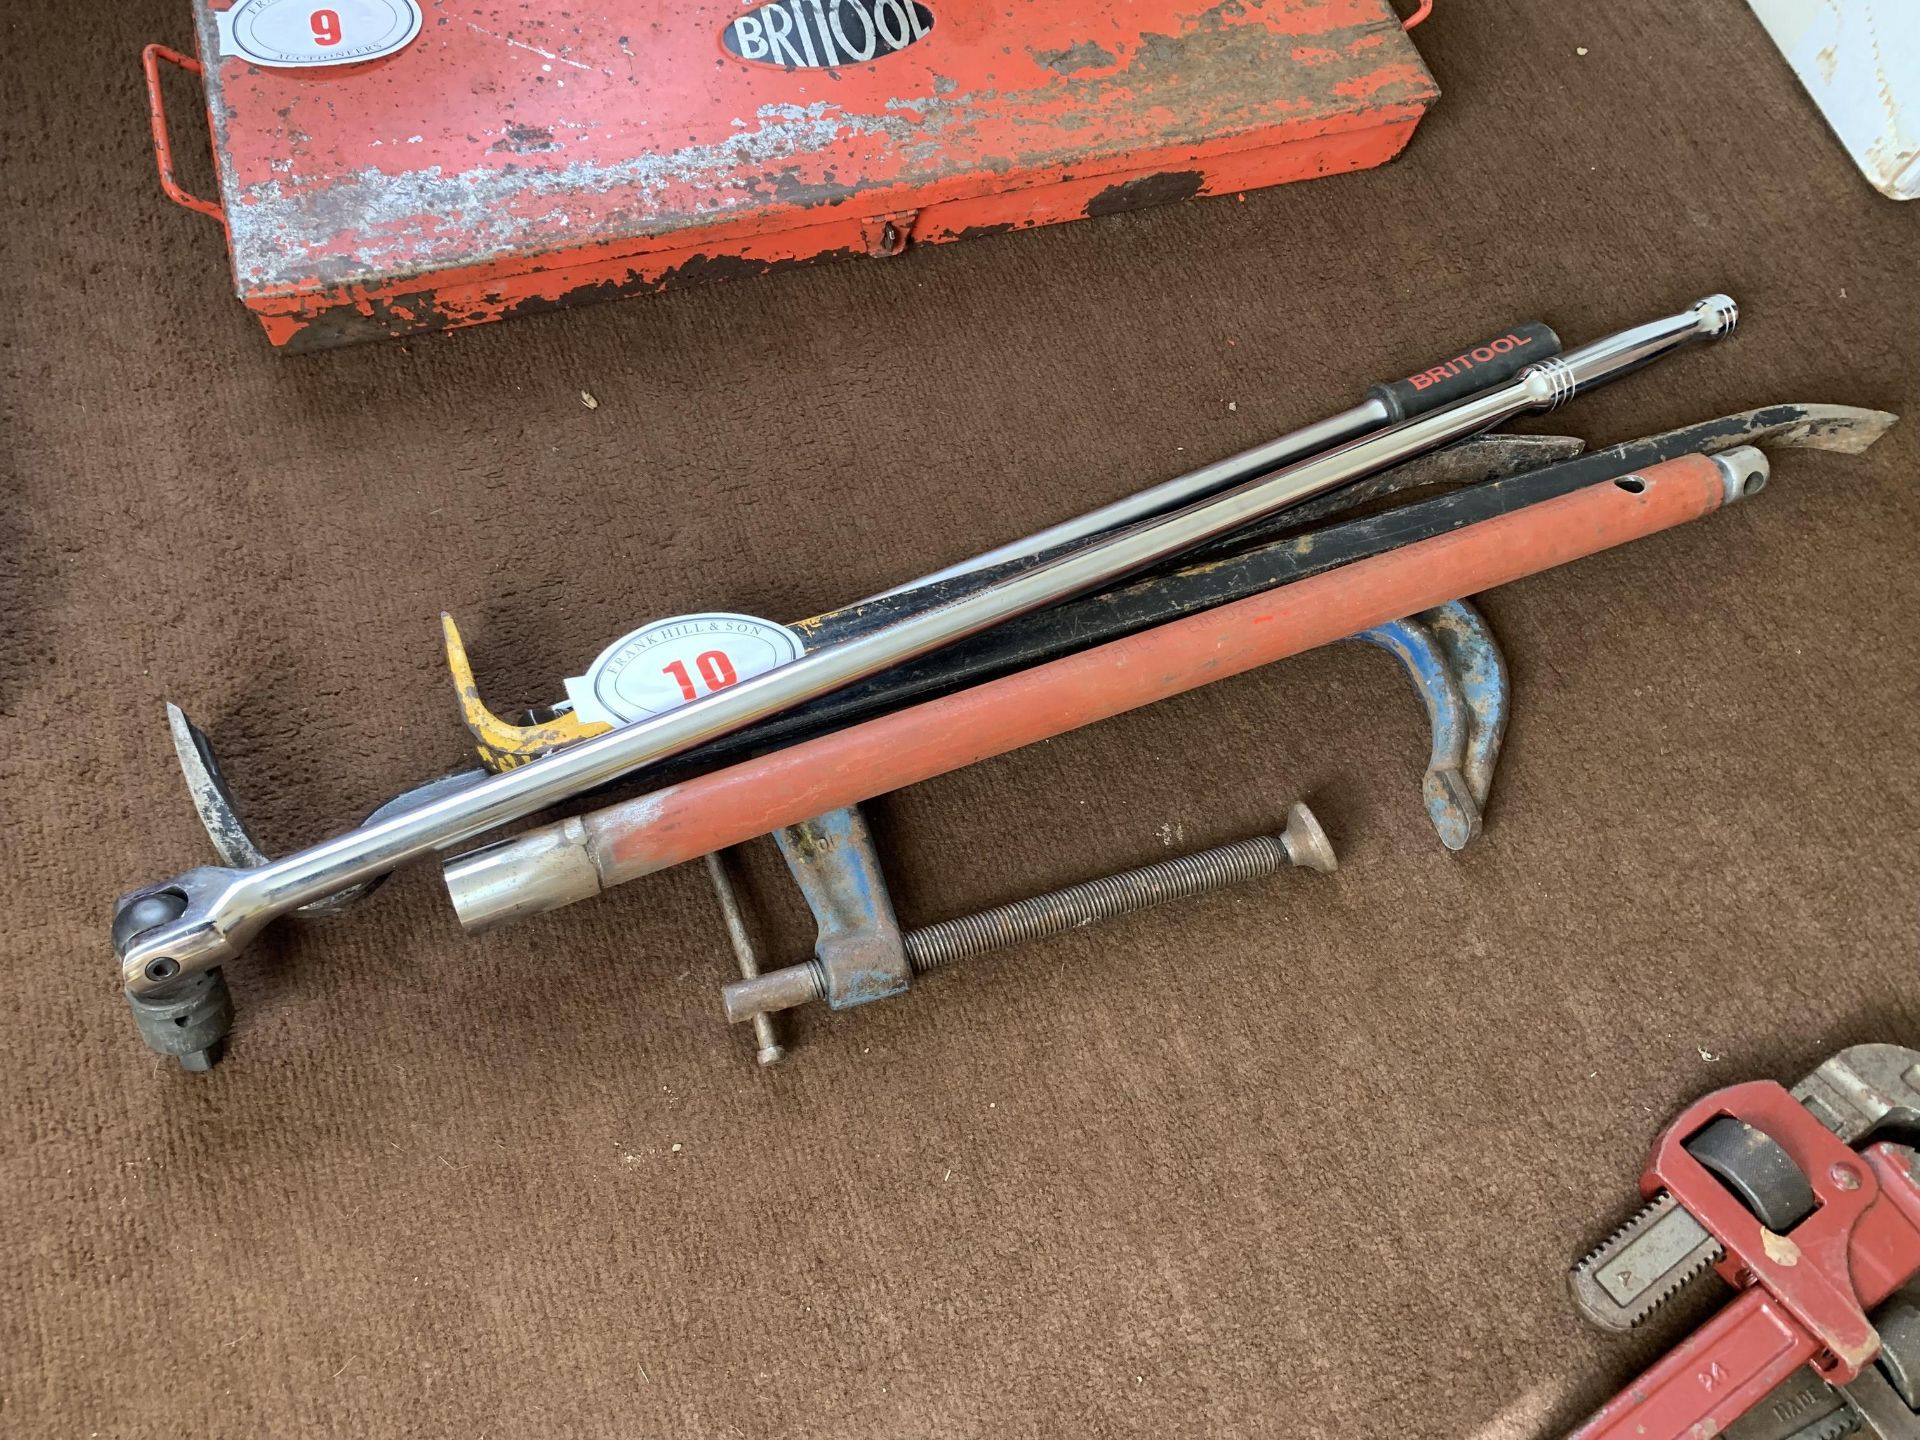 Pry bars, large wrenches etc